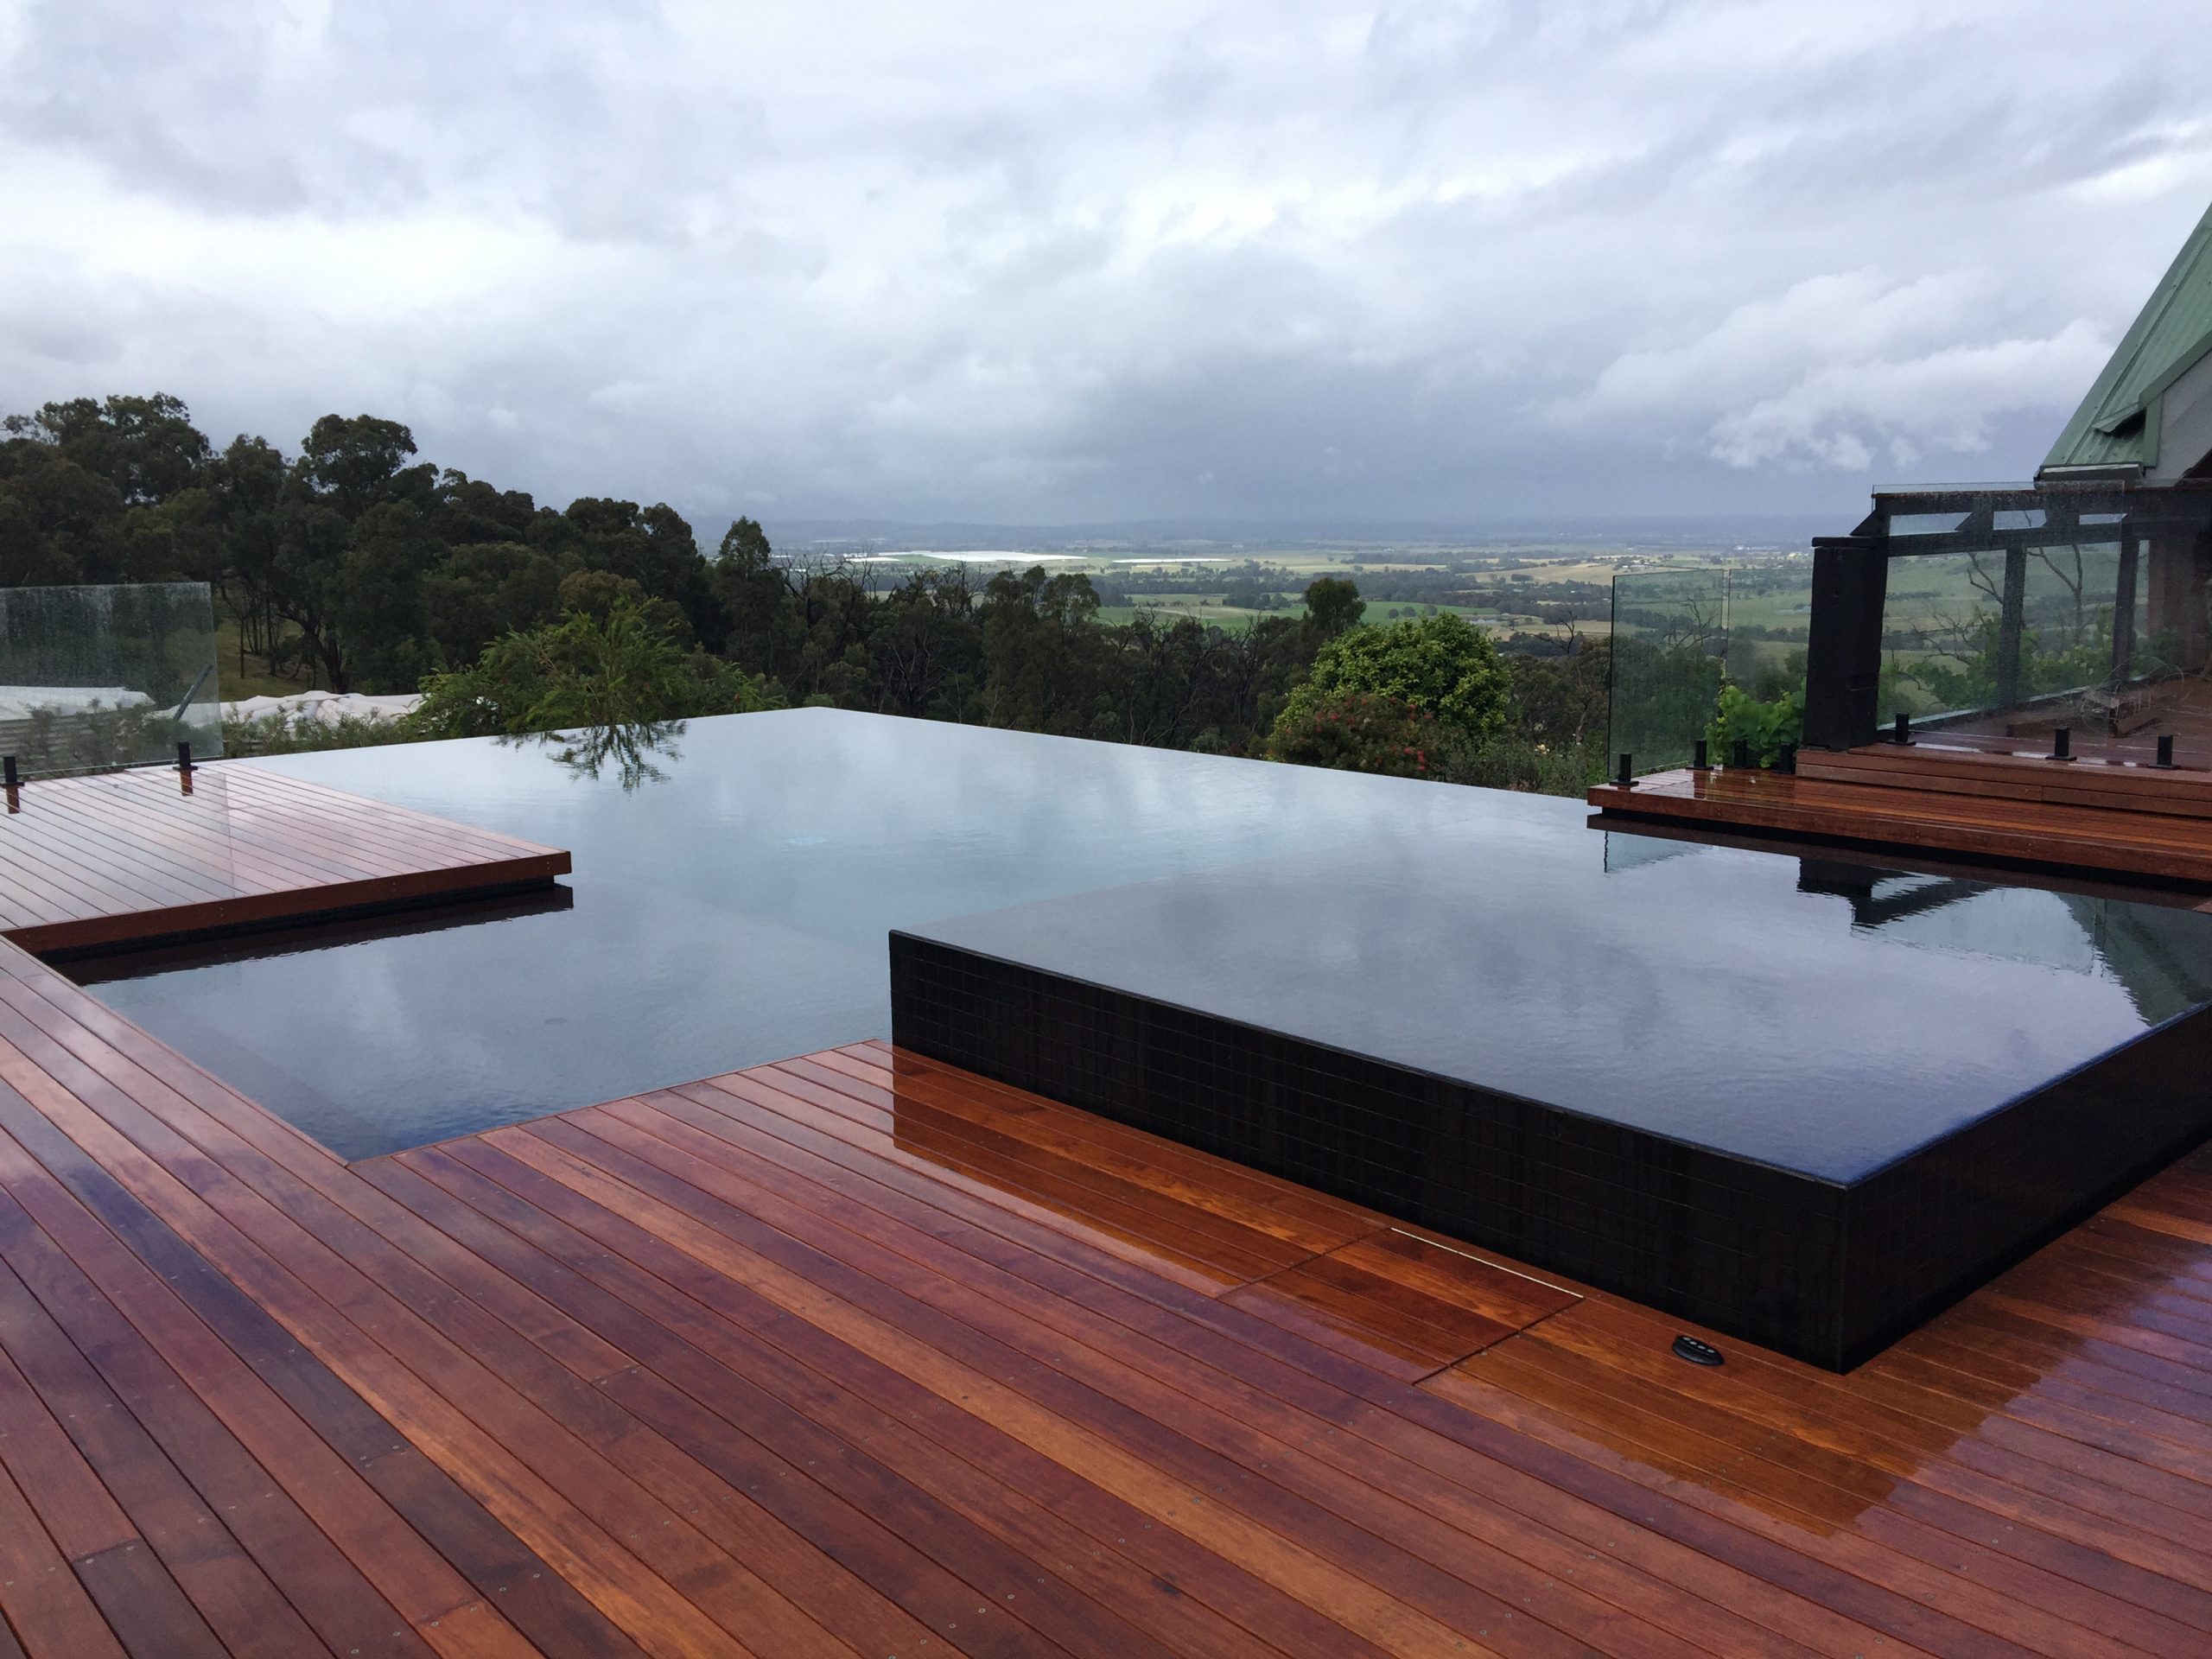 Luxury infinity pool surrounded by a hardwood deck